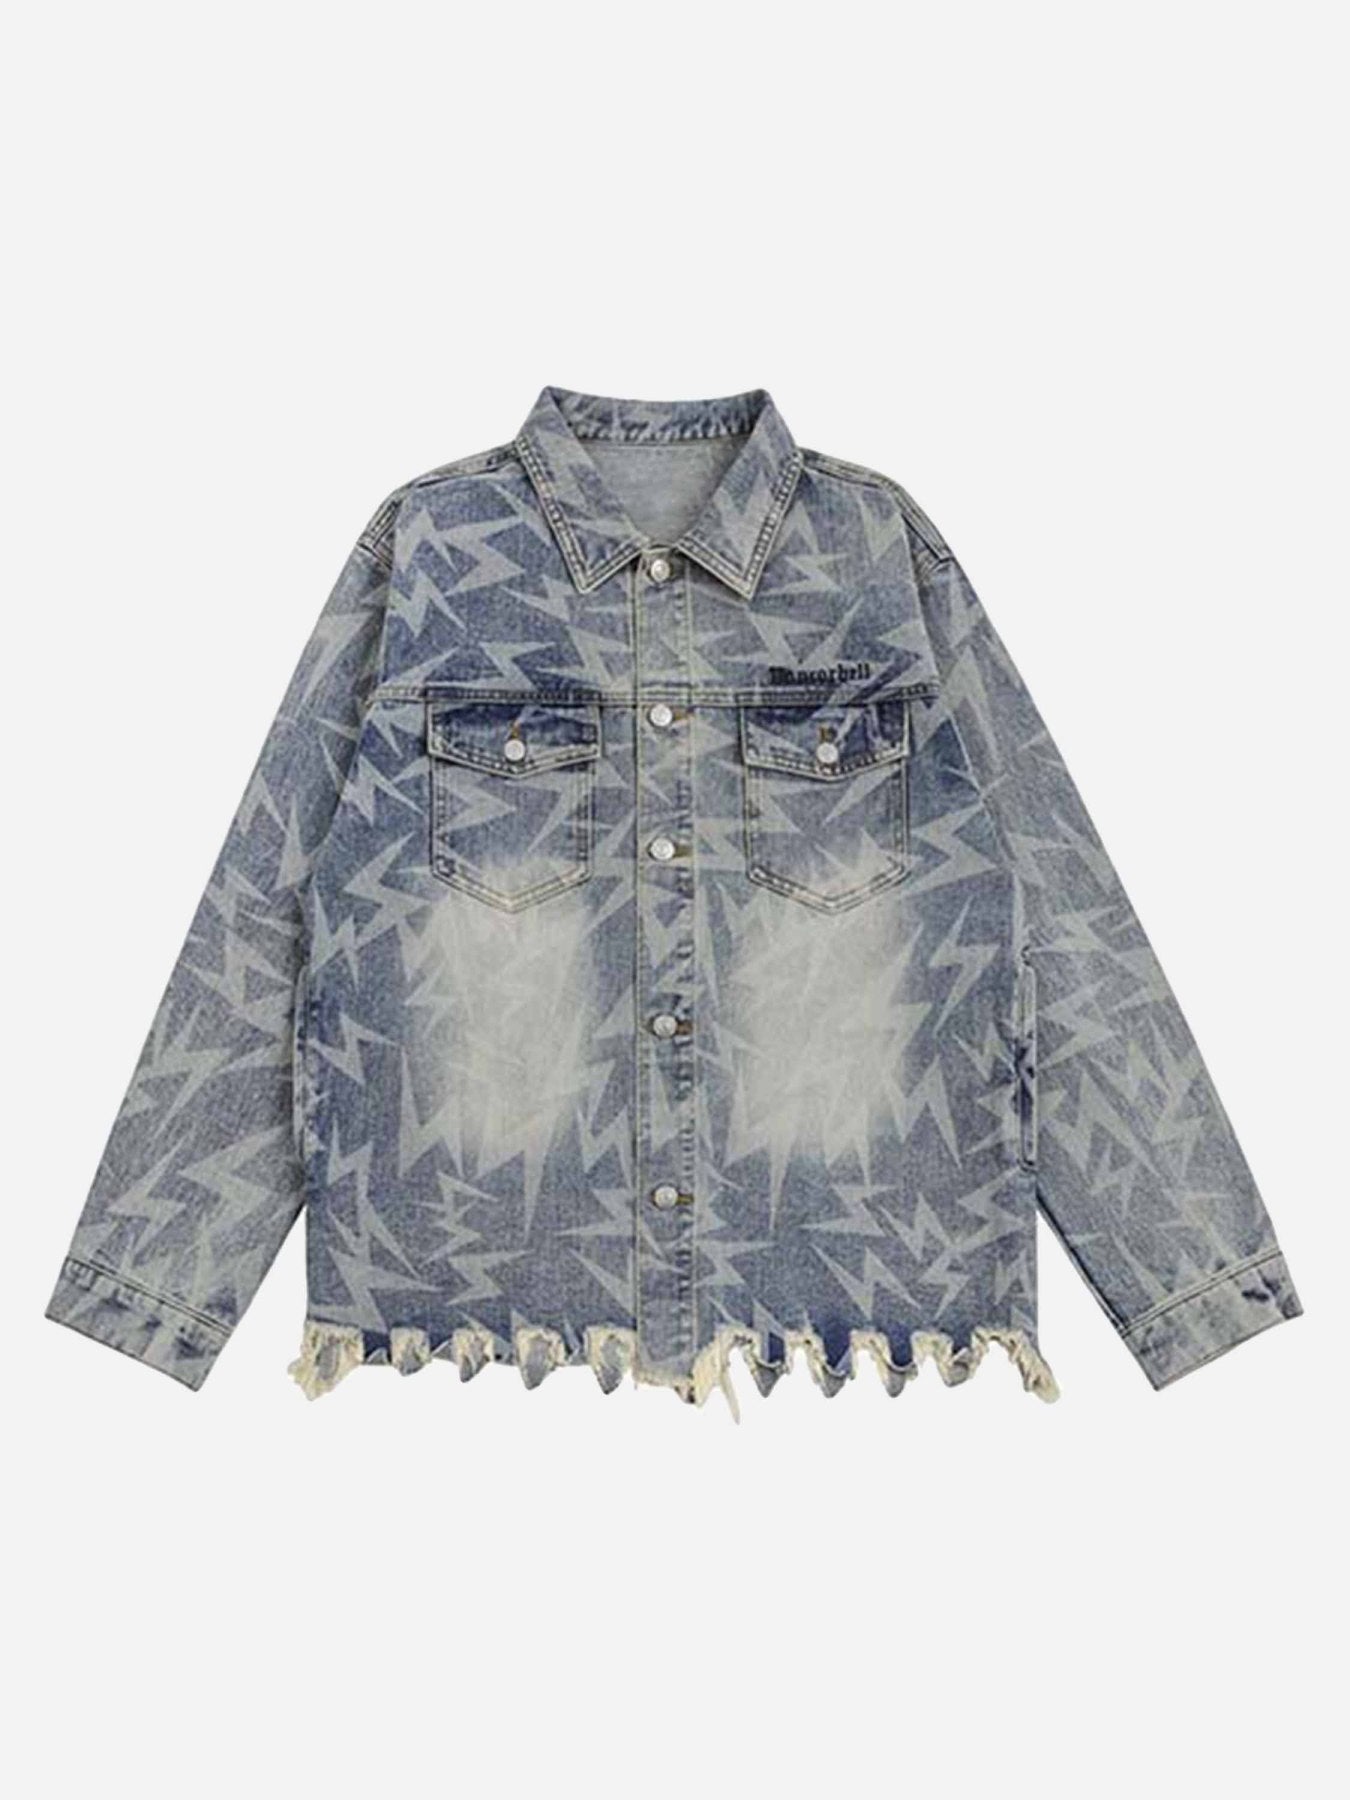 The Supermade Washed And Stressed Full Print Denim Jacket